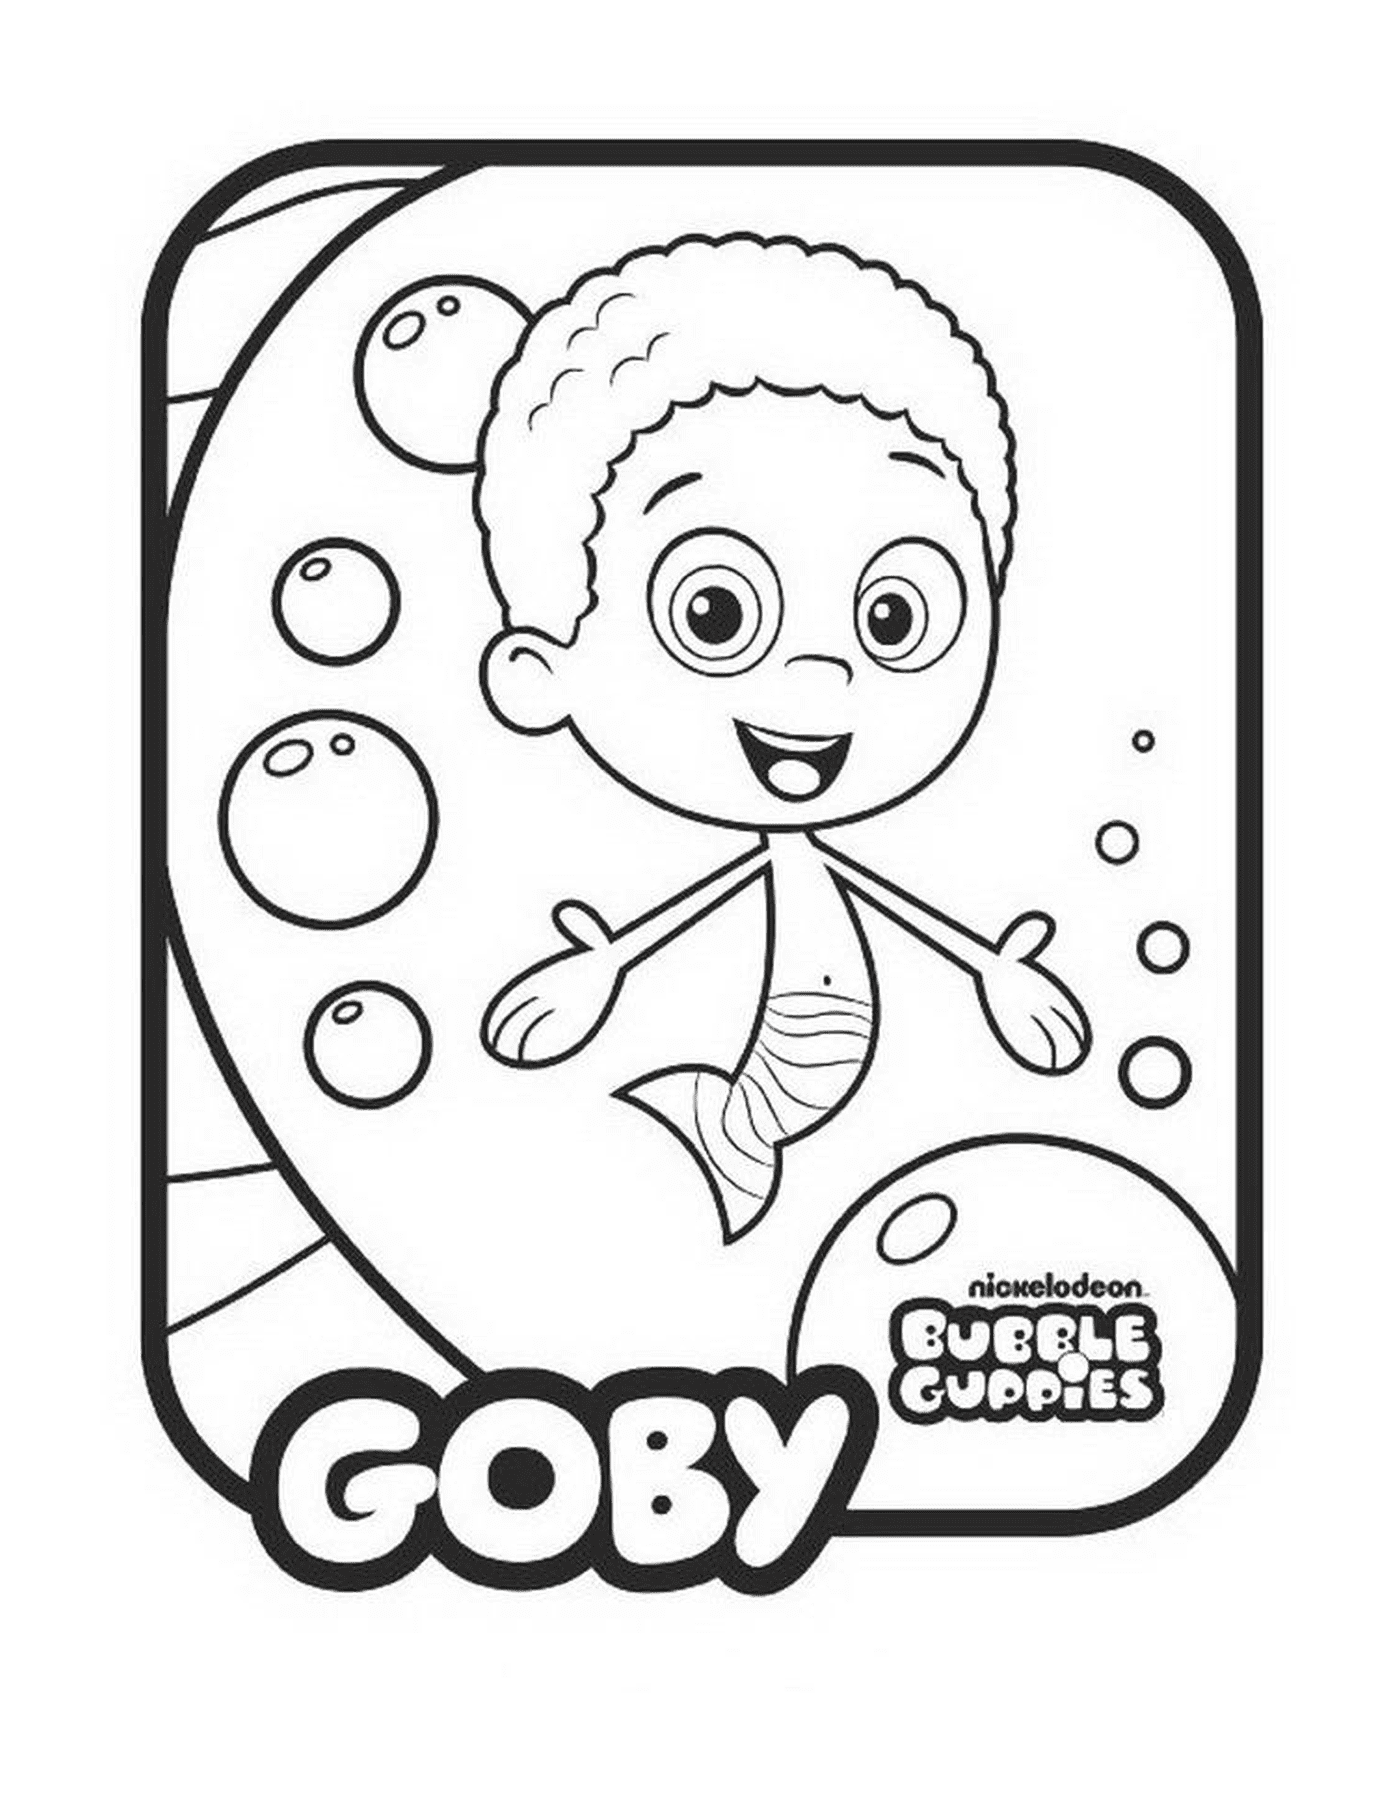   Goby des Bubble Guppies 